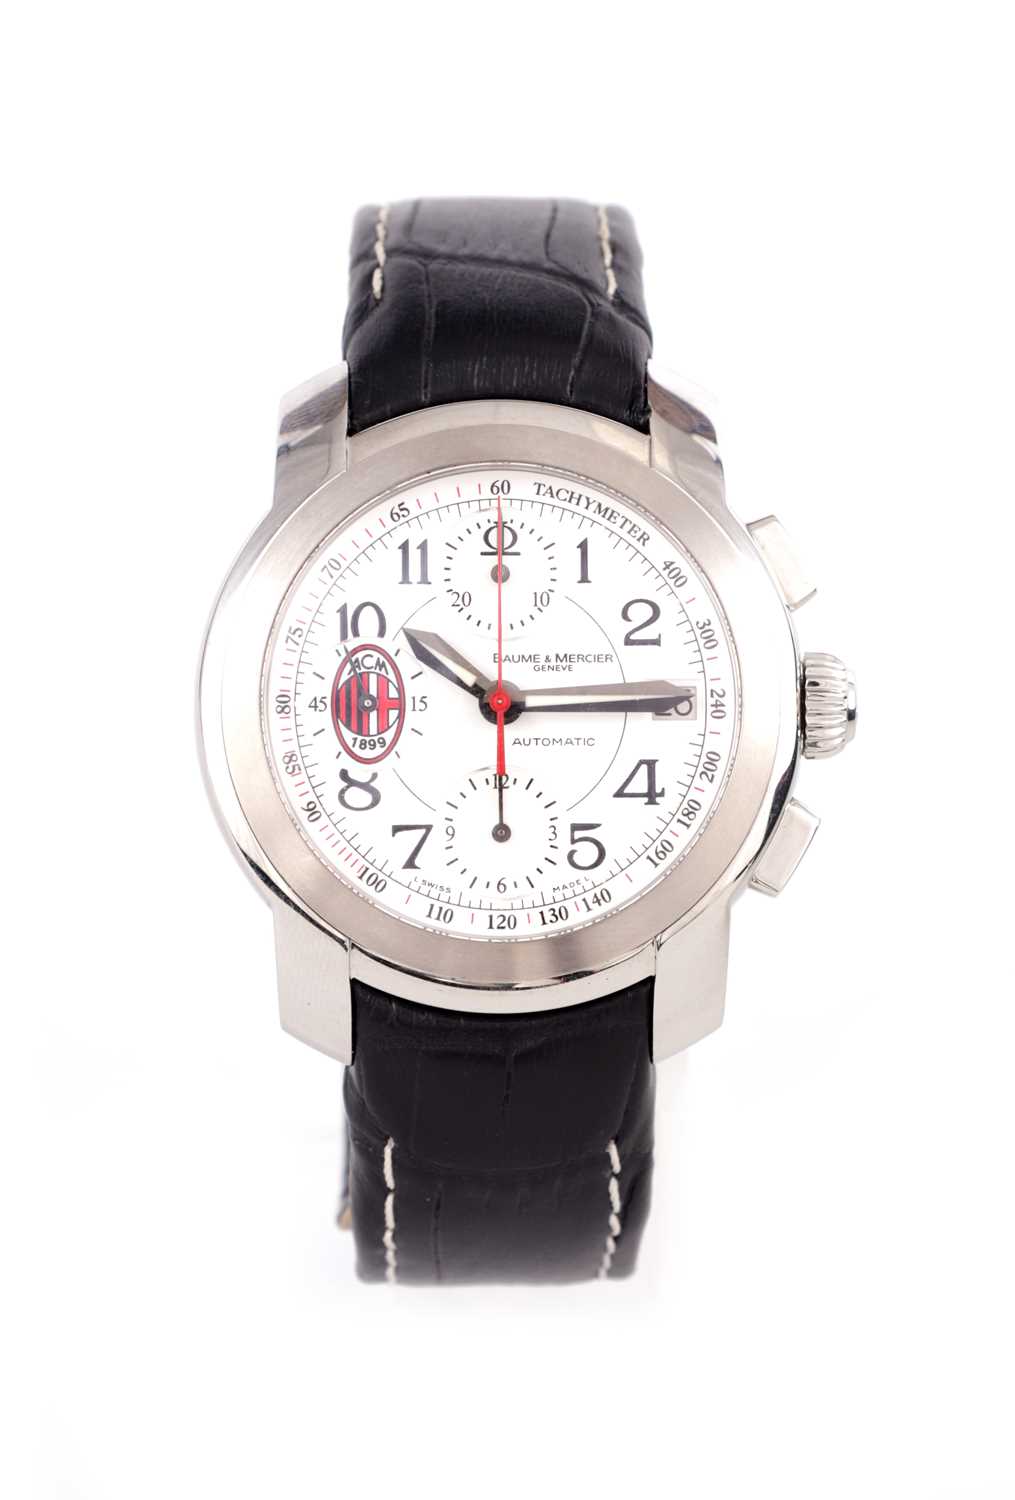 Lot 262 - A BAUME & MERCIER. A LIMITED EDITION 14/50 AC MILAN STAINLESS STEEL AUTOMATIC CALENDAR CHRONOGRAPH WRISTWATCH